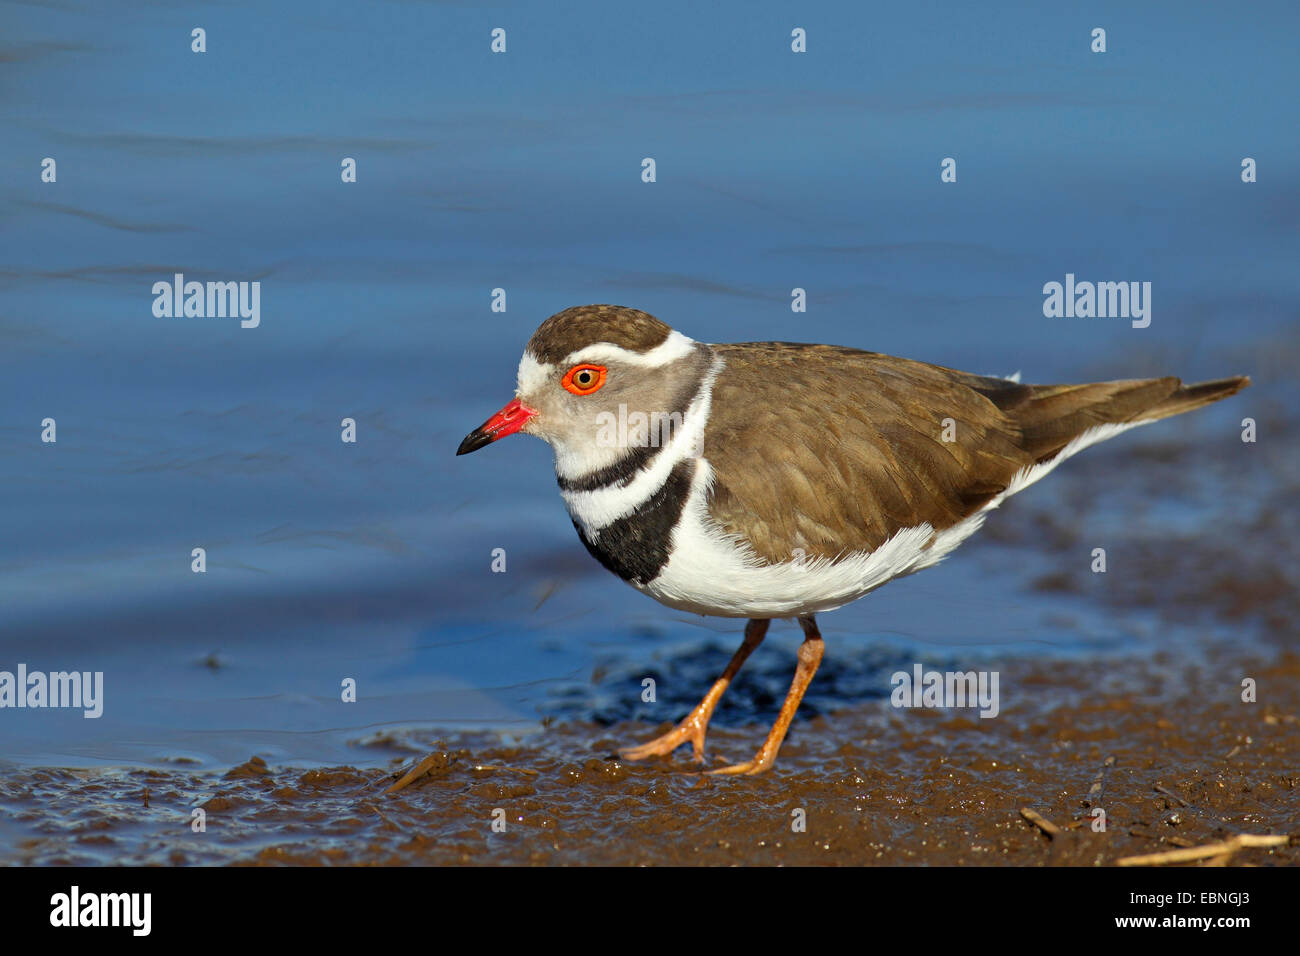 three-banded plover (Charadrius tricollaris), standing on the lakeshore, South Africa, Kruger National Park Stock Photo